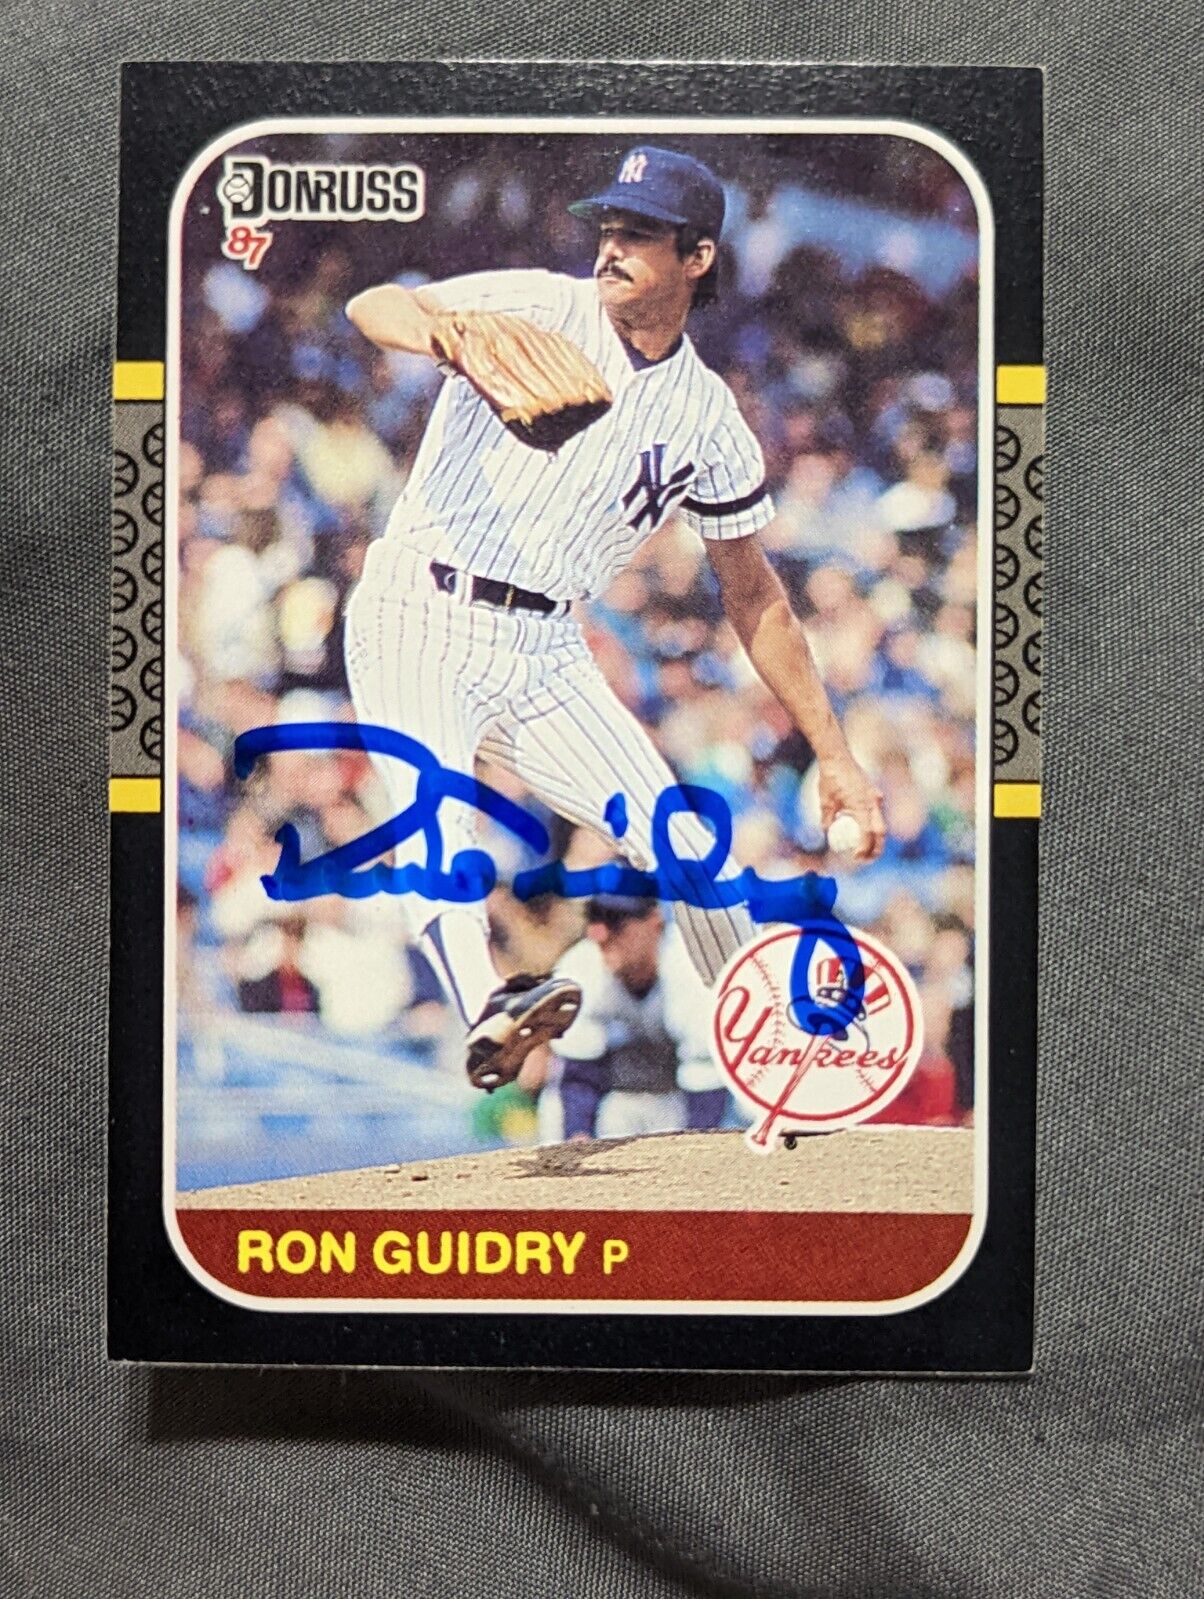 RON GUIDRY AUTOGRAPH SIGNED 1987 Donruss Card New York YANKEES 